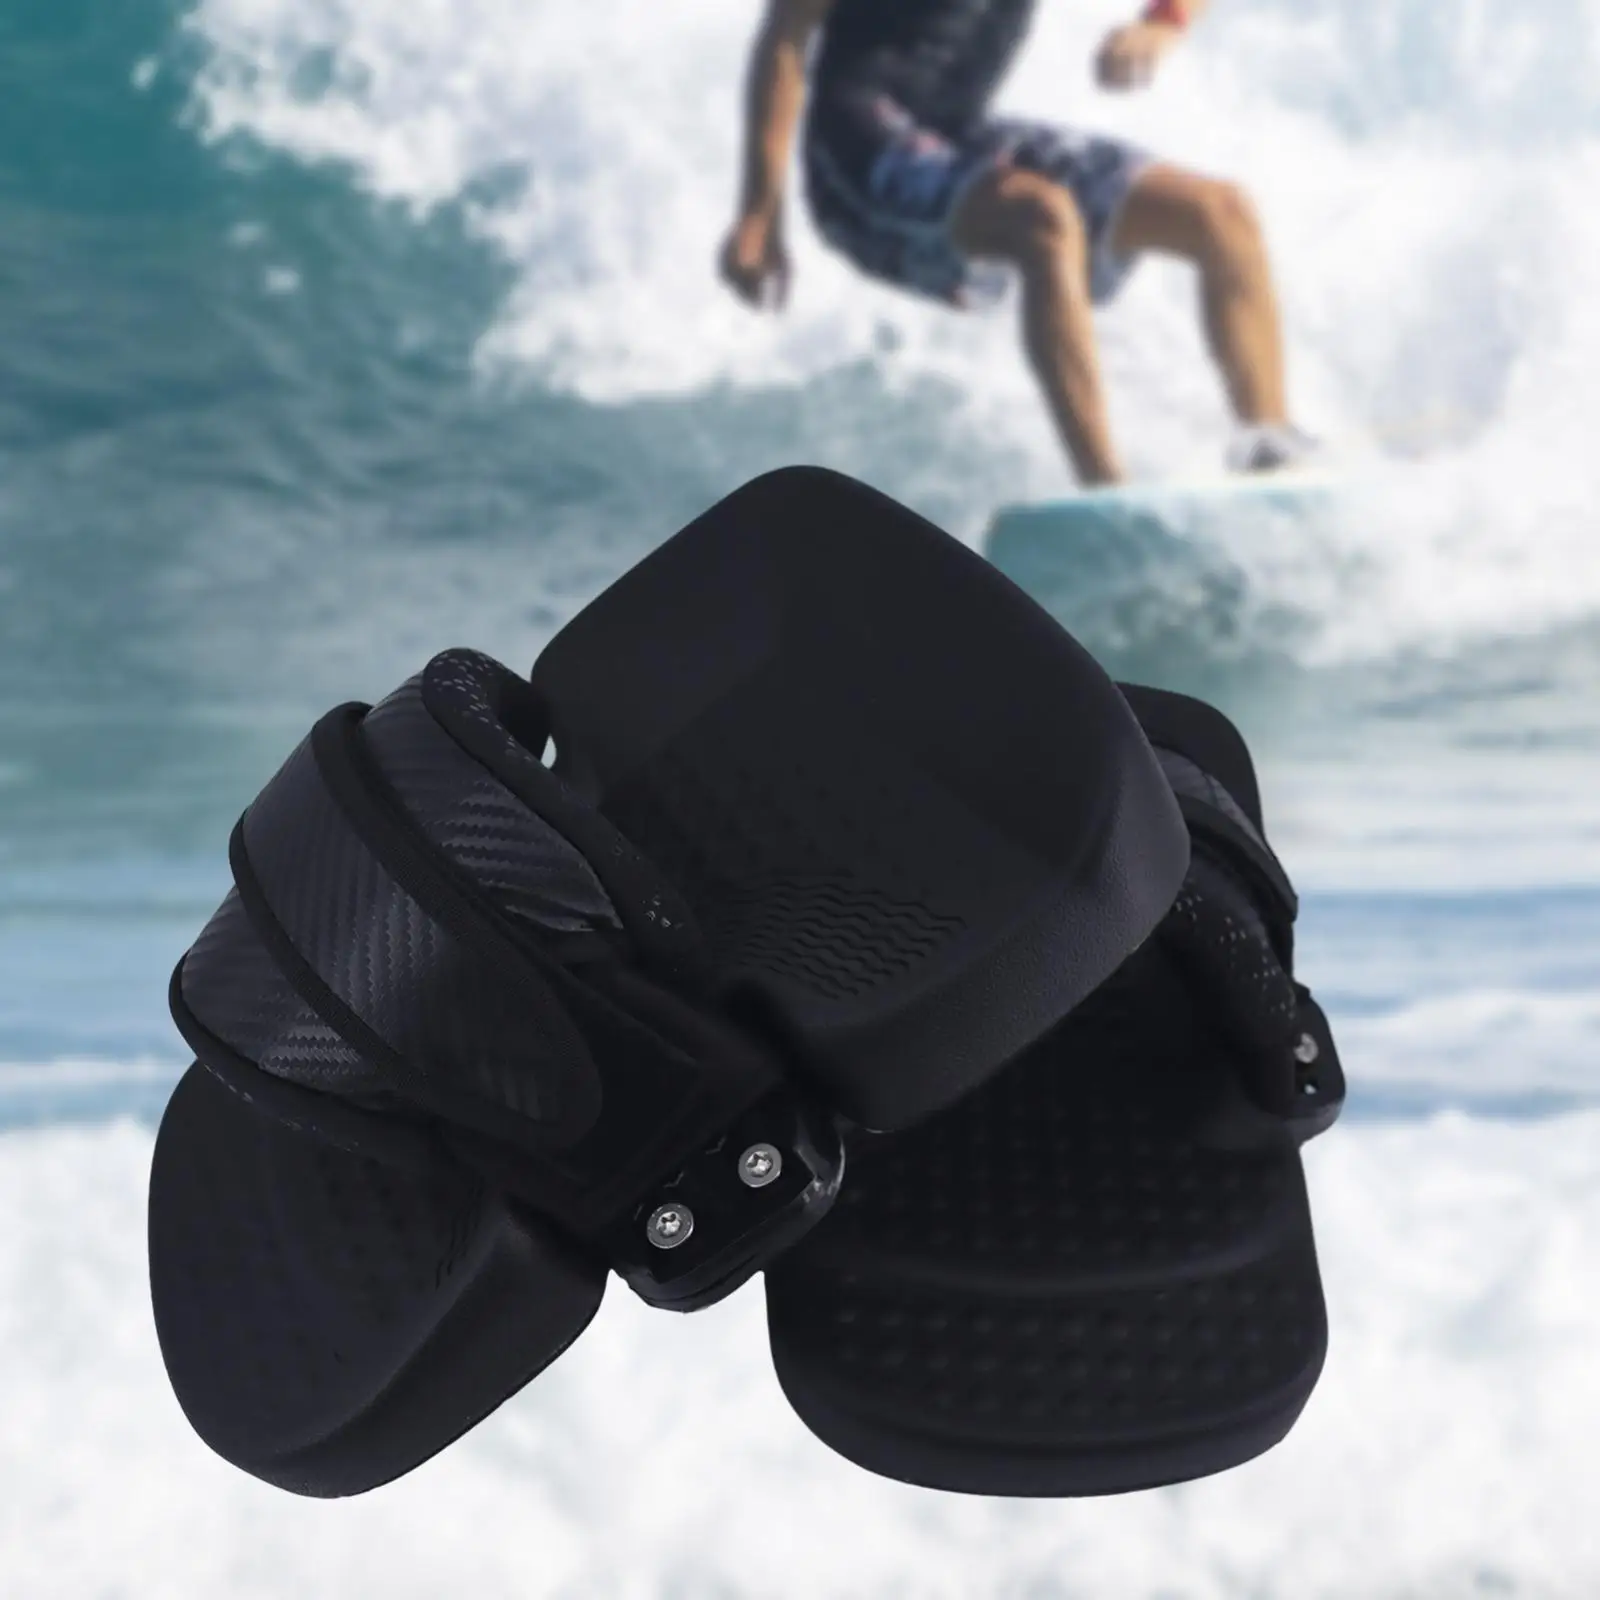 Rubber Kiteboard Boots Surf Board Foot Covers Adjustable AntiSlip Dot Design Sturdy 1 Pair Shoes Guard for Surf Board Outdoor